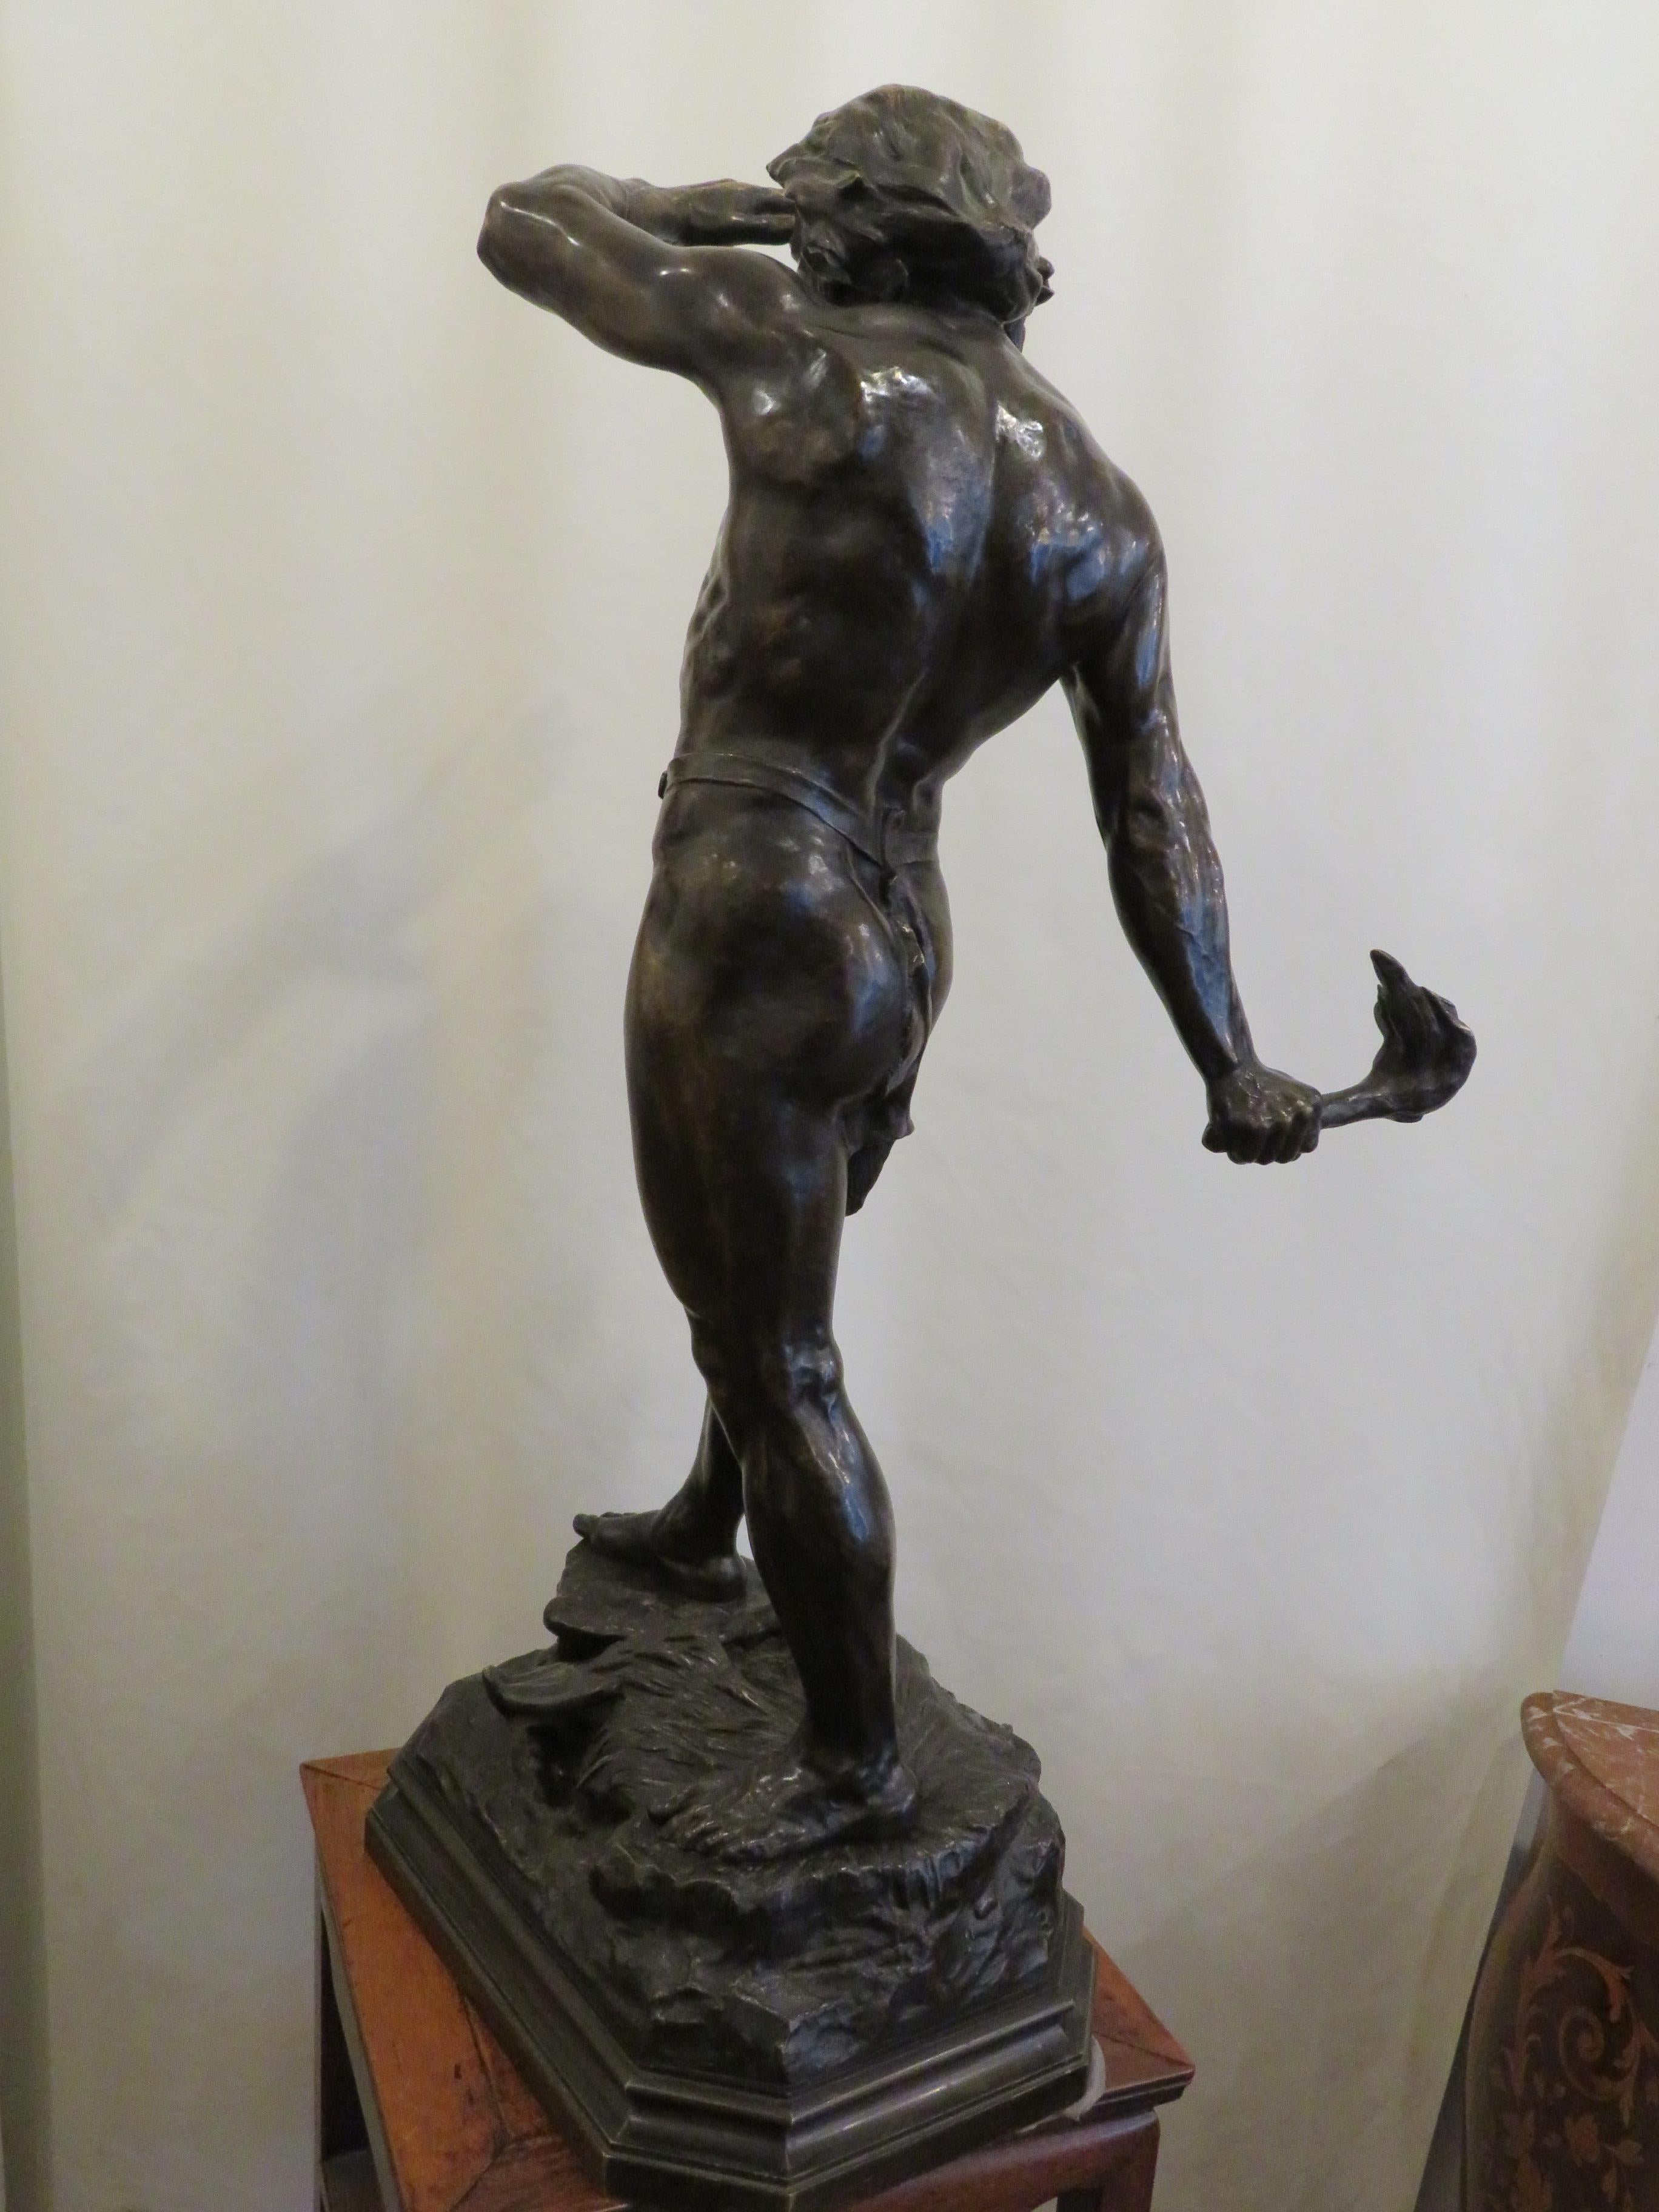 “Samson Burning The Harvest” in bronze by French sculptor Leon Bonduel, (1857-1928), circa 1890. Signed on the base

Bronze with deep brown patina, representing Samson standing viewing the distance, holding a torch in his hand, resting on a